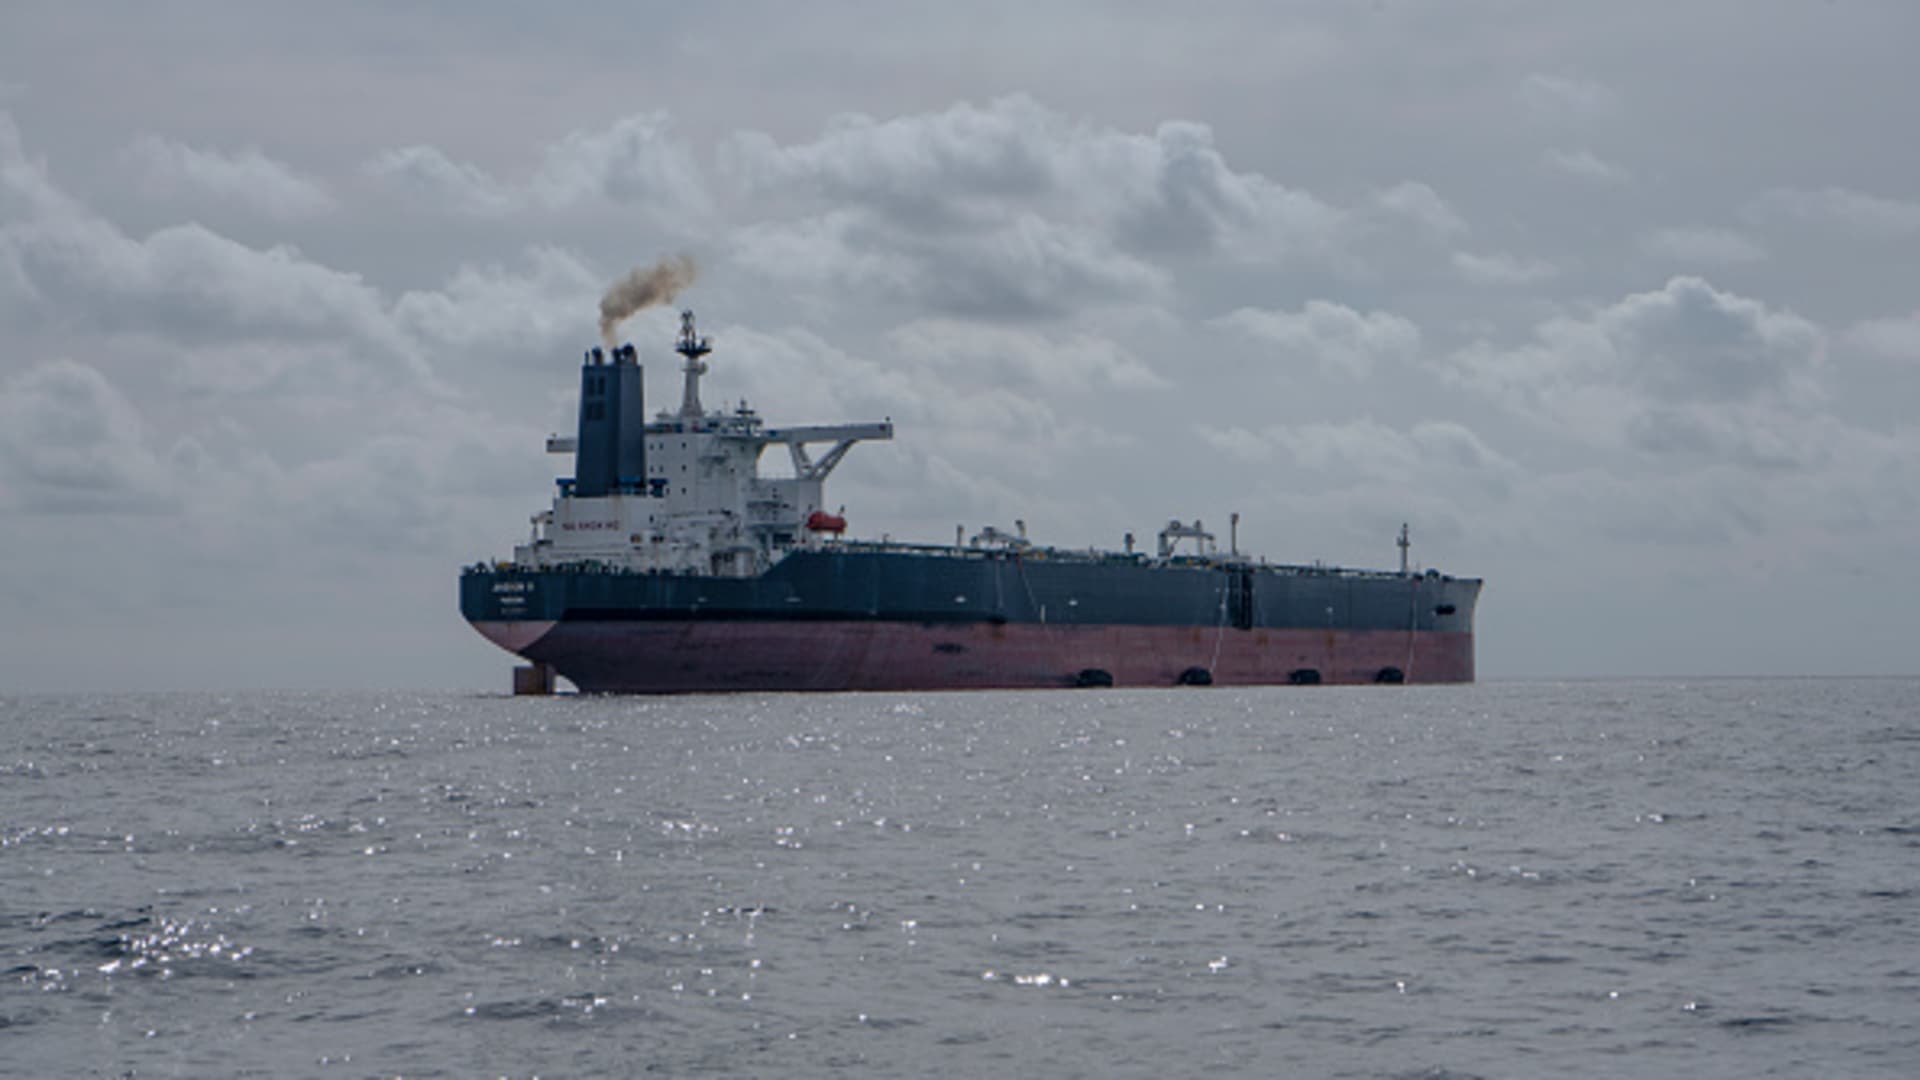 ‘Dark’ ships are faking their locations to move oil around the world — and it's likely worth billions of dollars